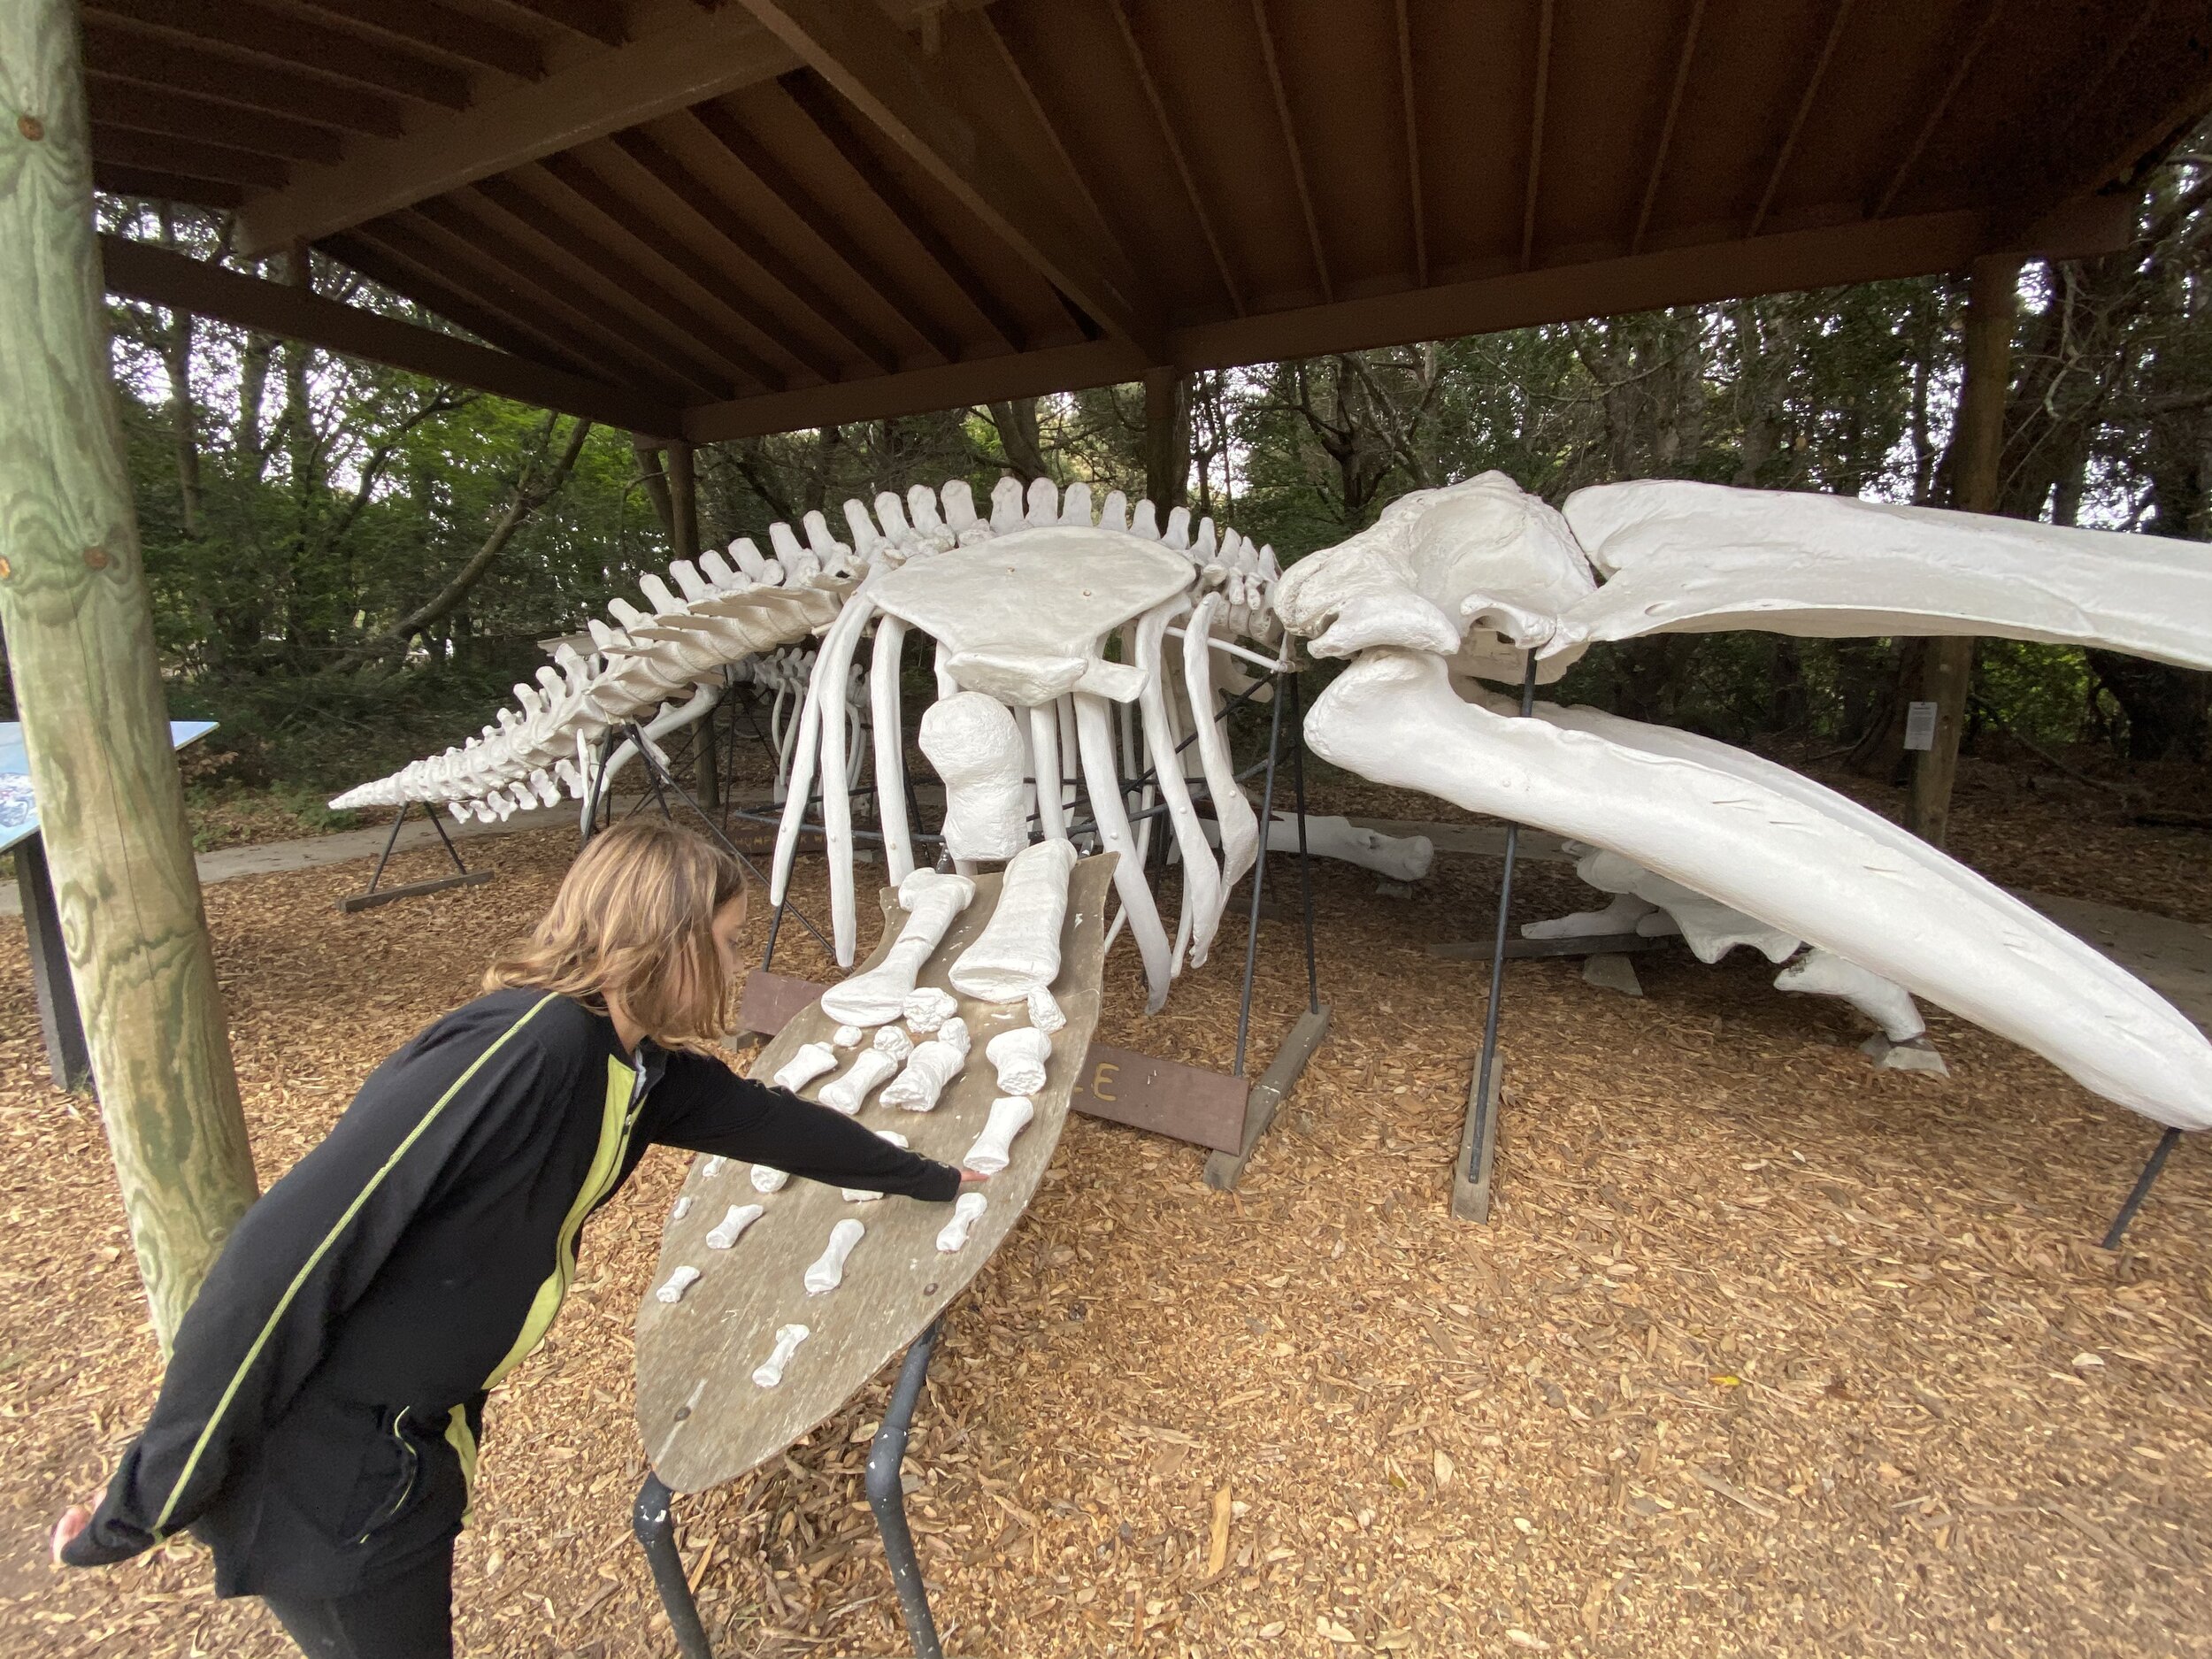 The skeleton of a grey whale at the entrance to MacKerricher State Park